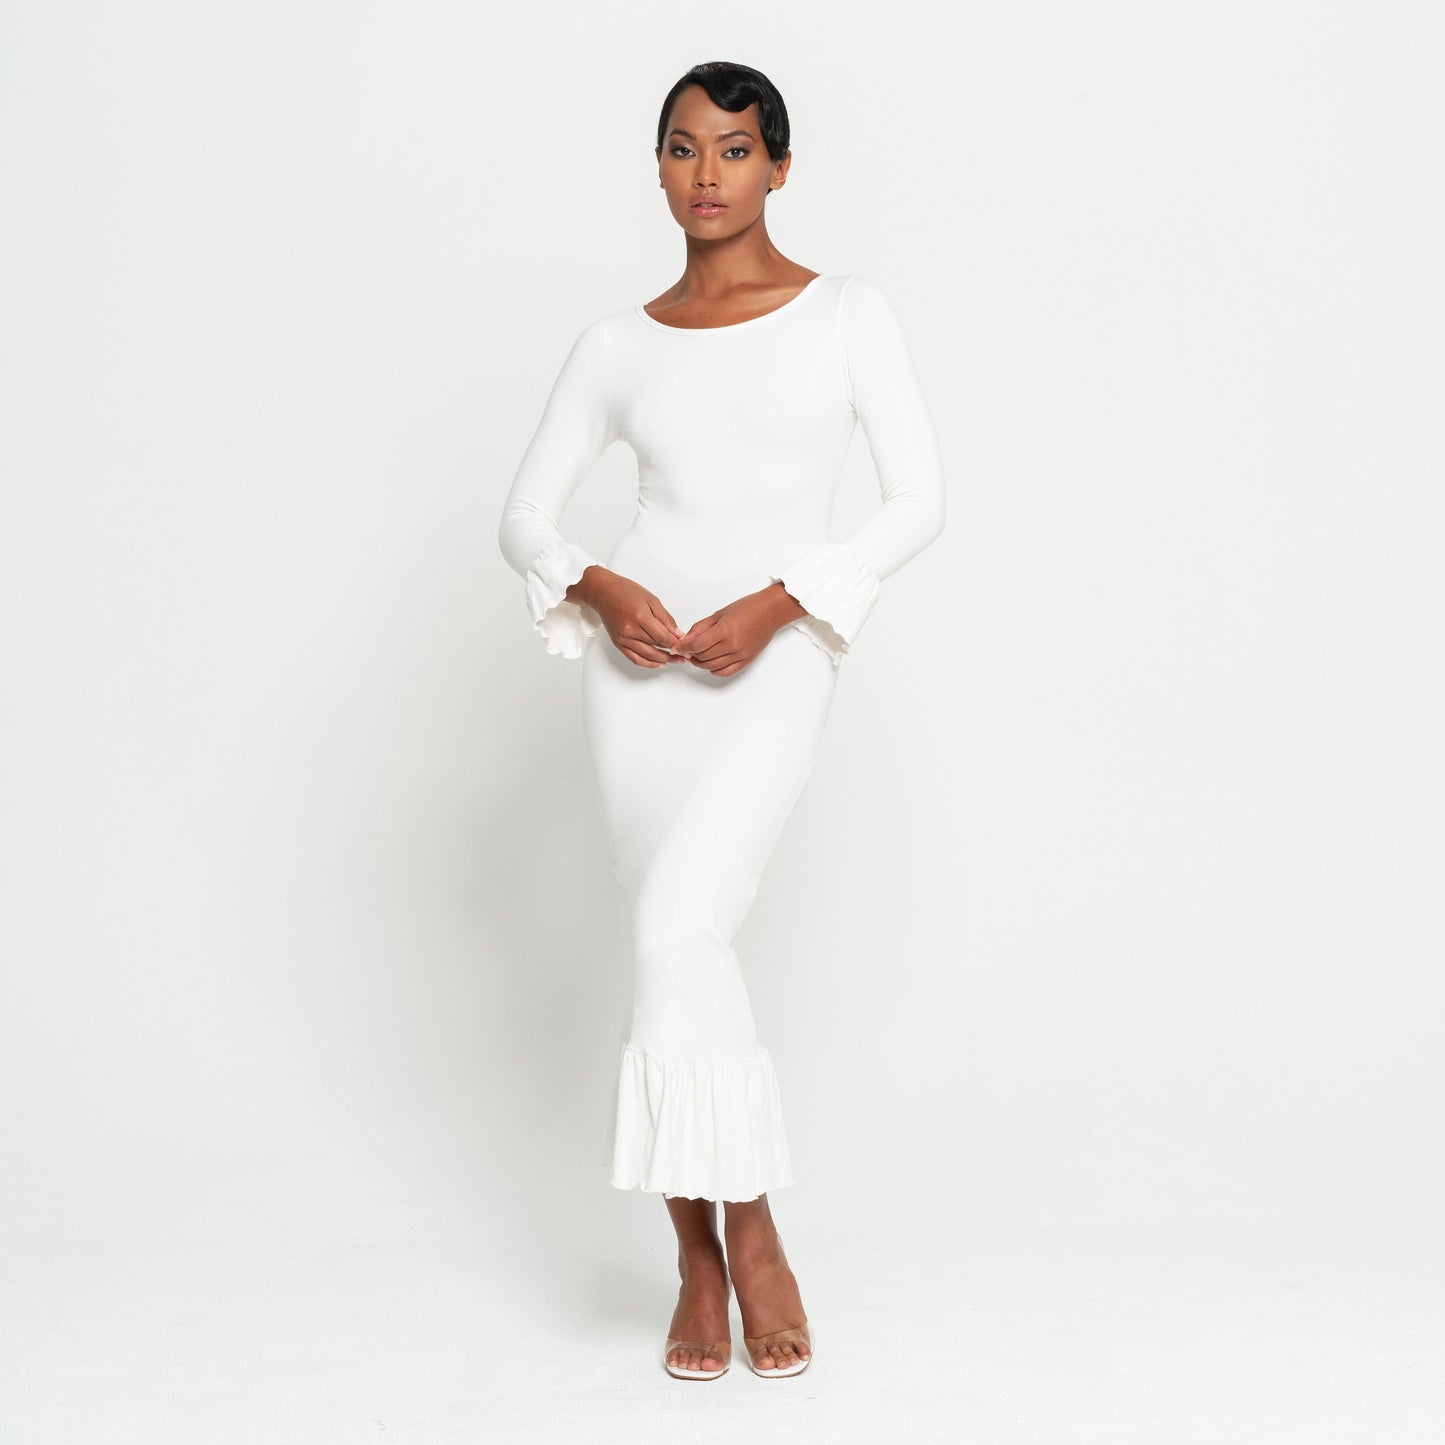 MARJORIE Bamboo Ruffle Dress, in Off-white